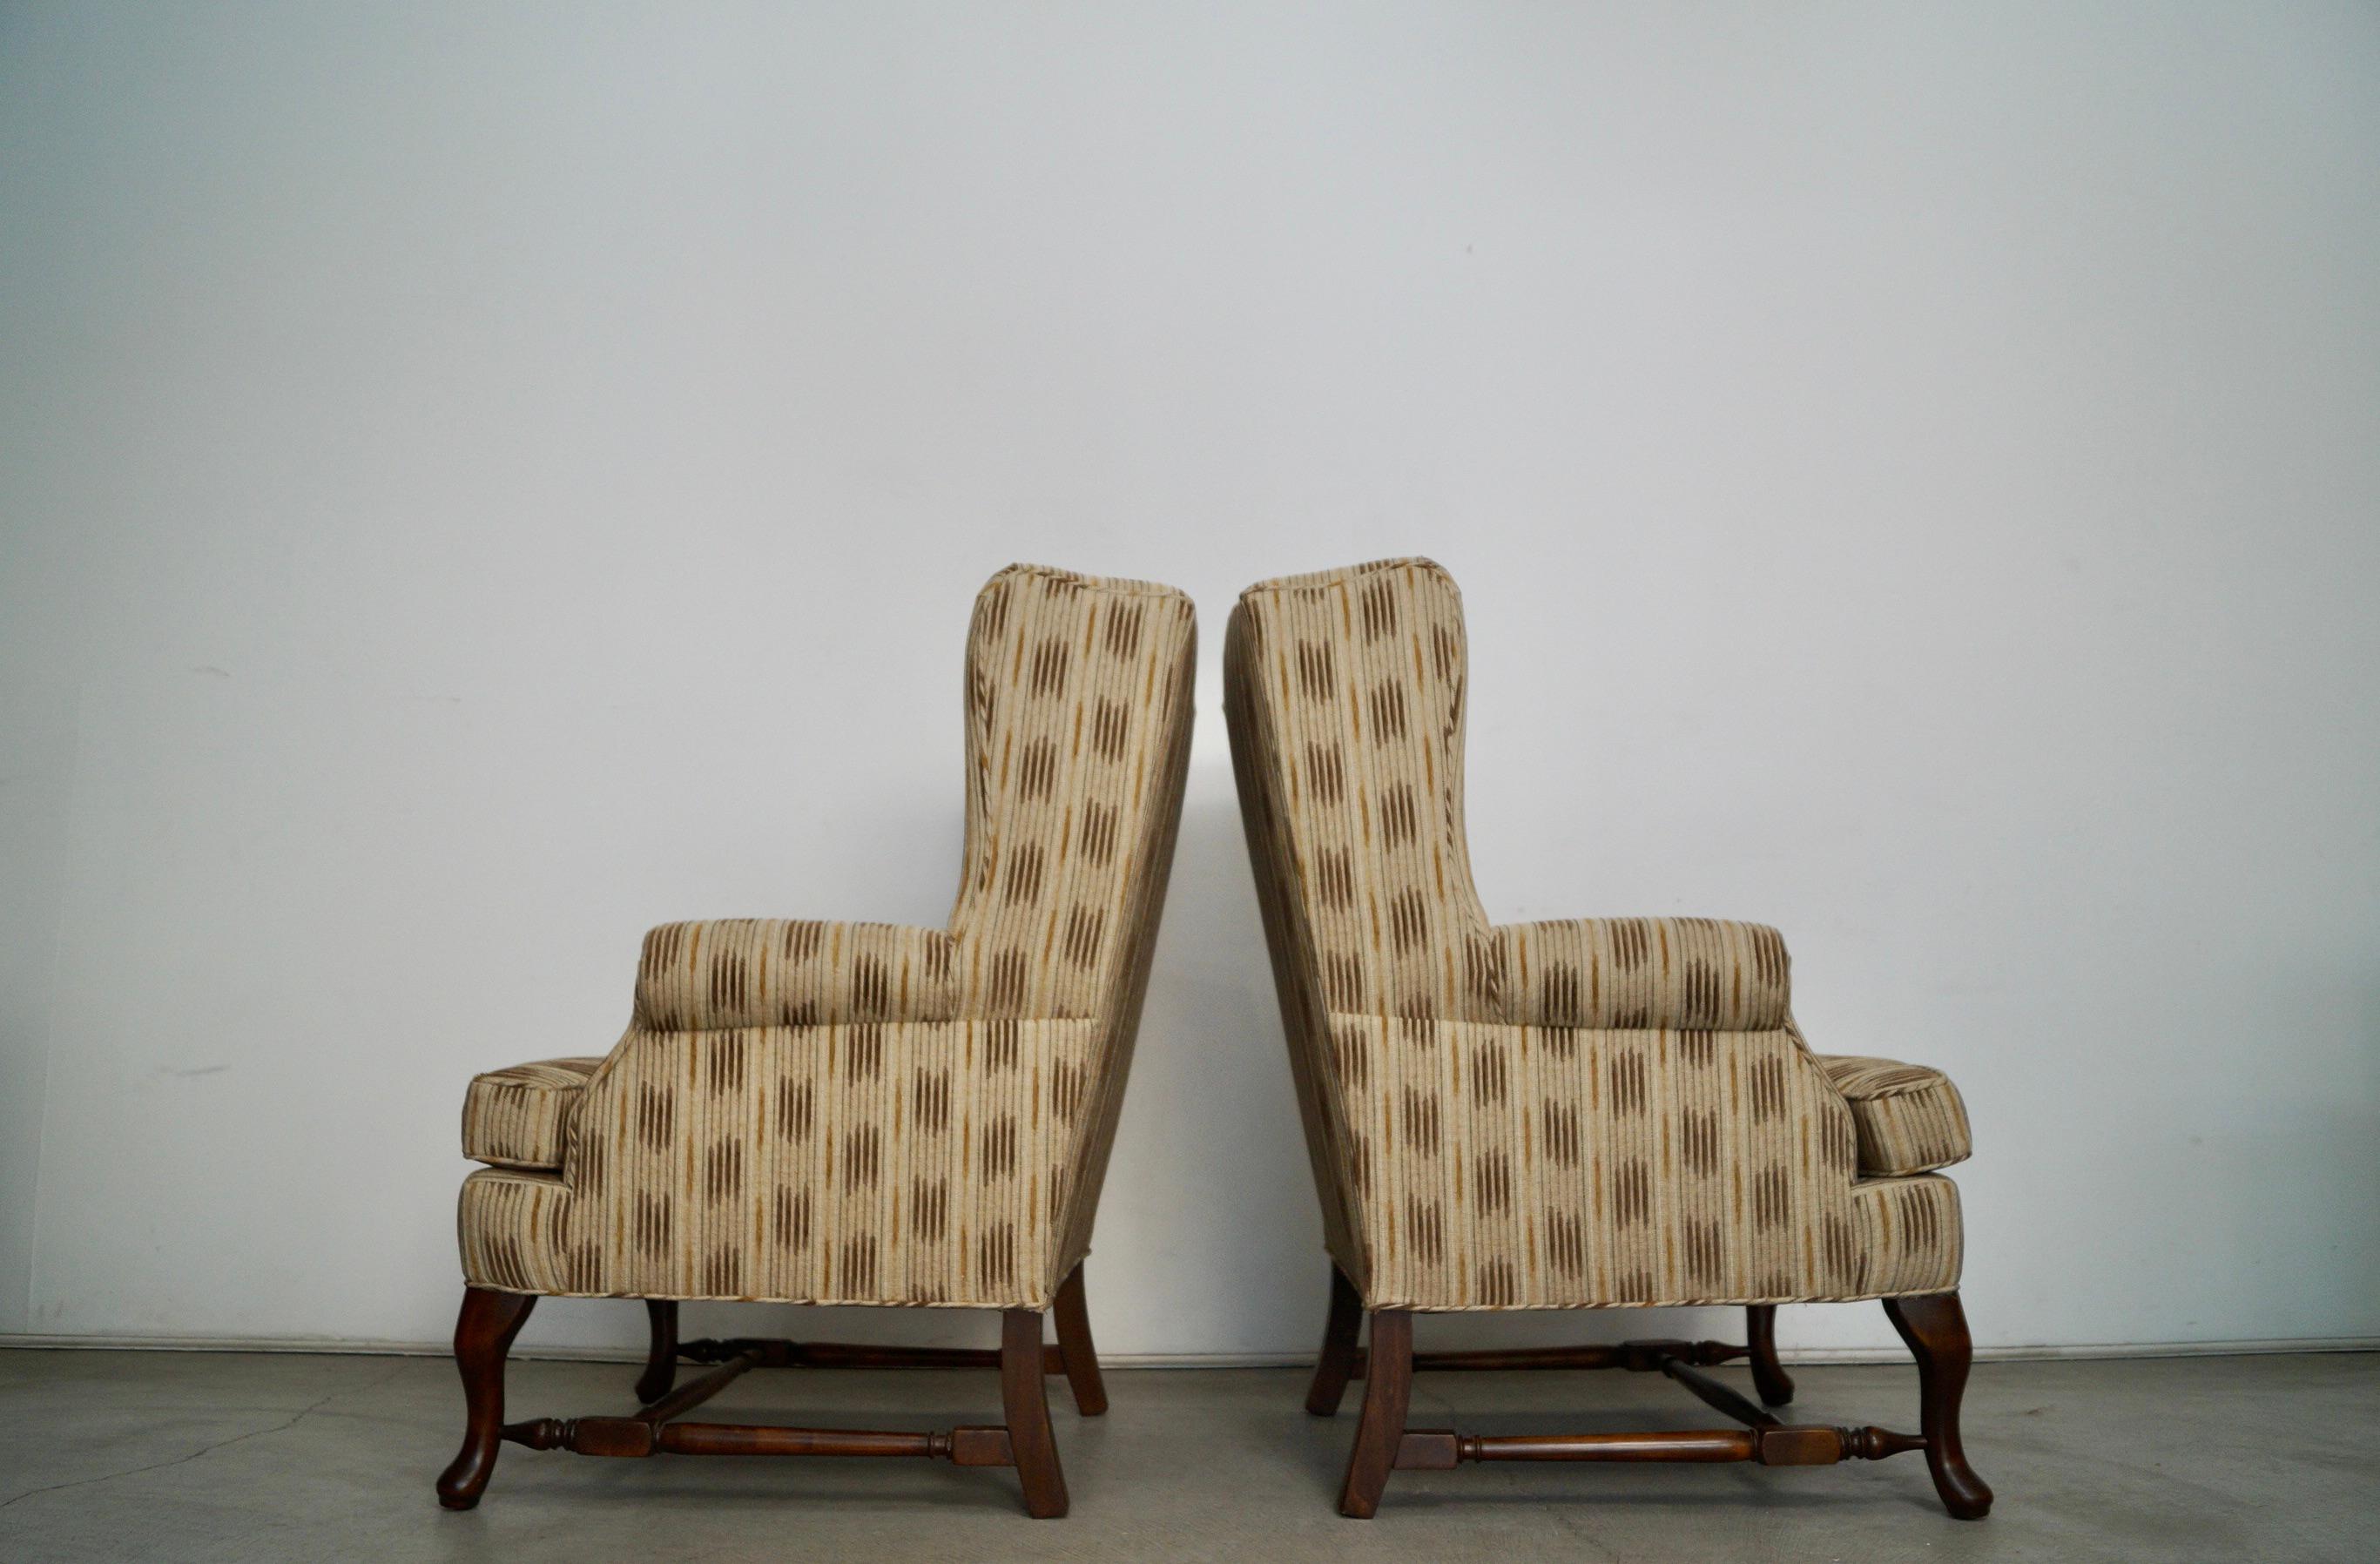 American 1970's Wingback Chairs Refinished & Reupholstered - a Pair For Sale